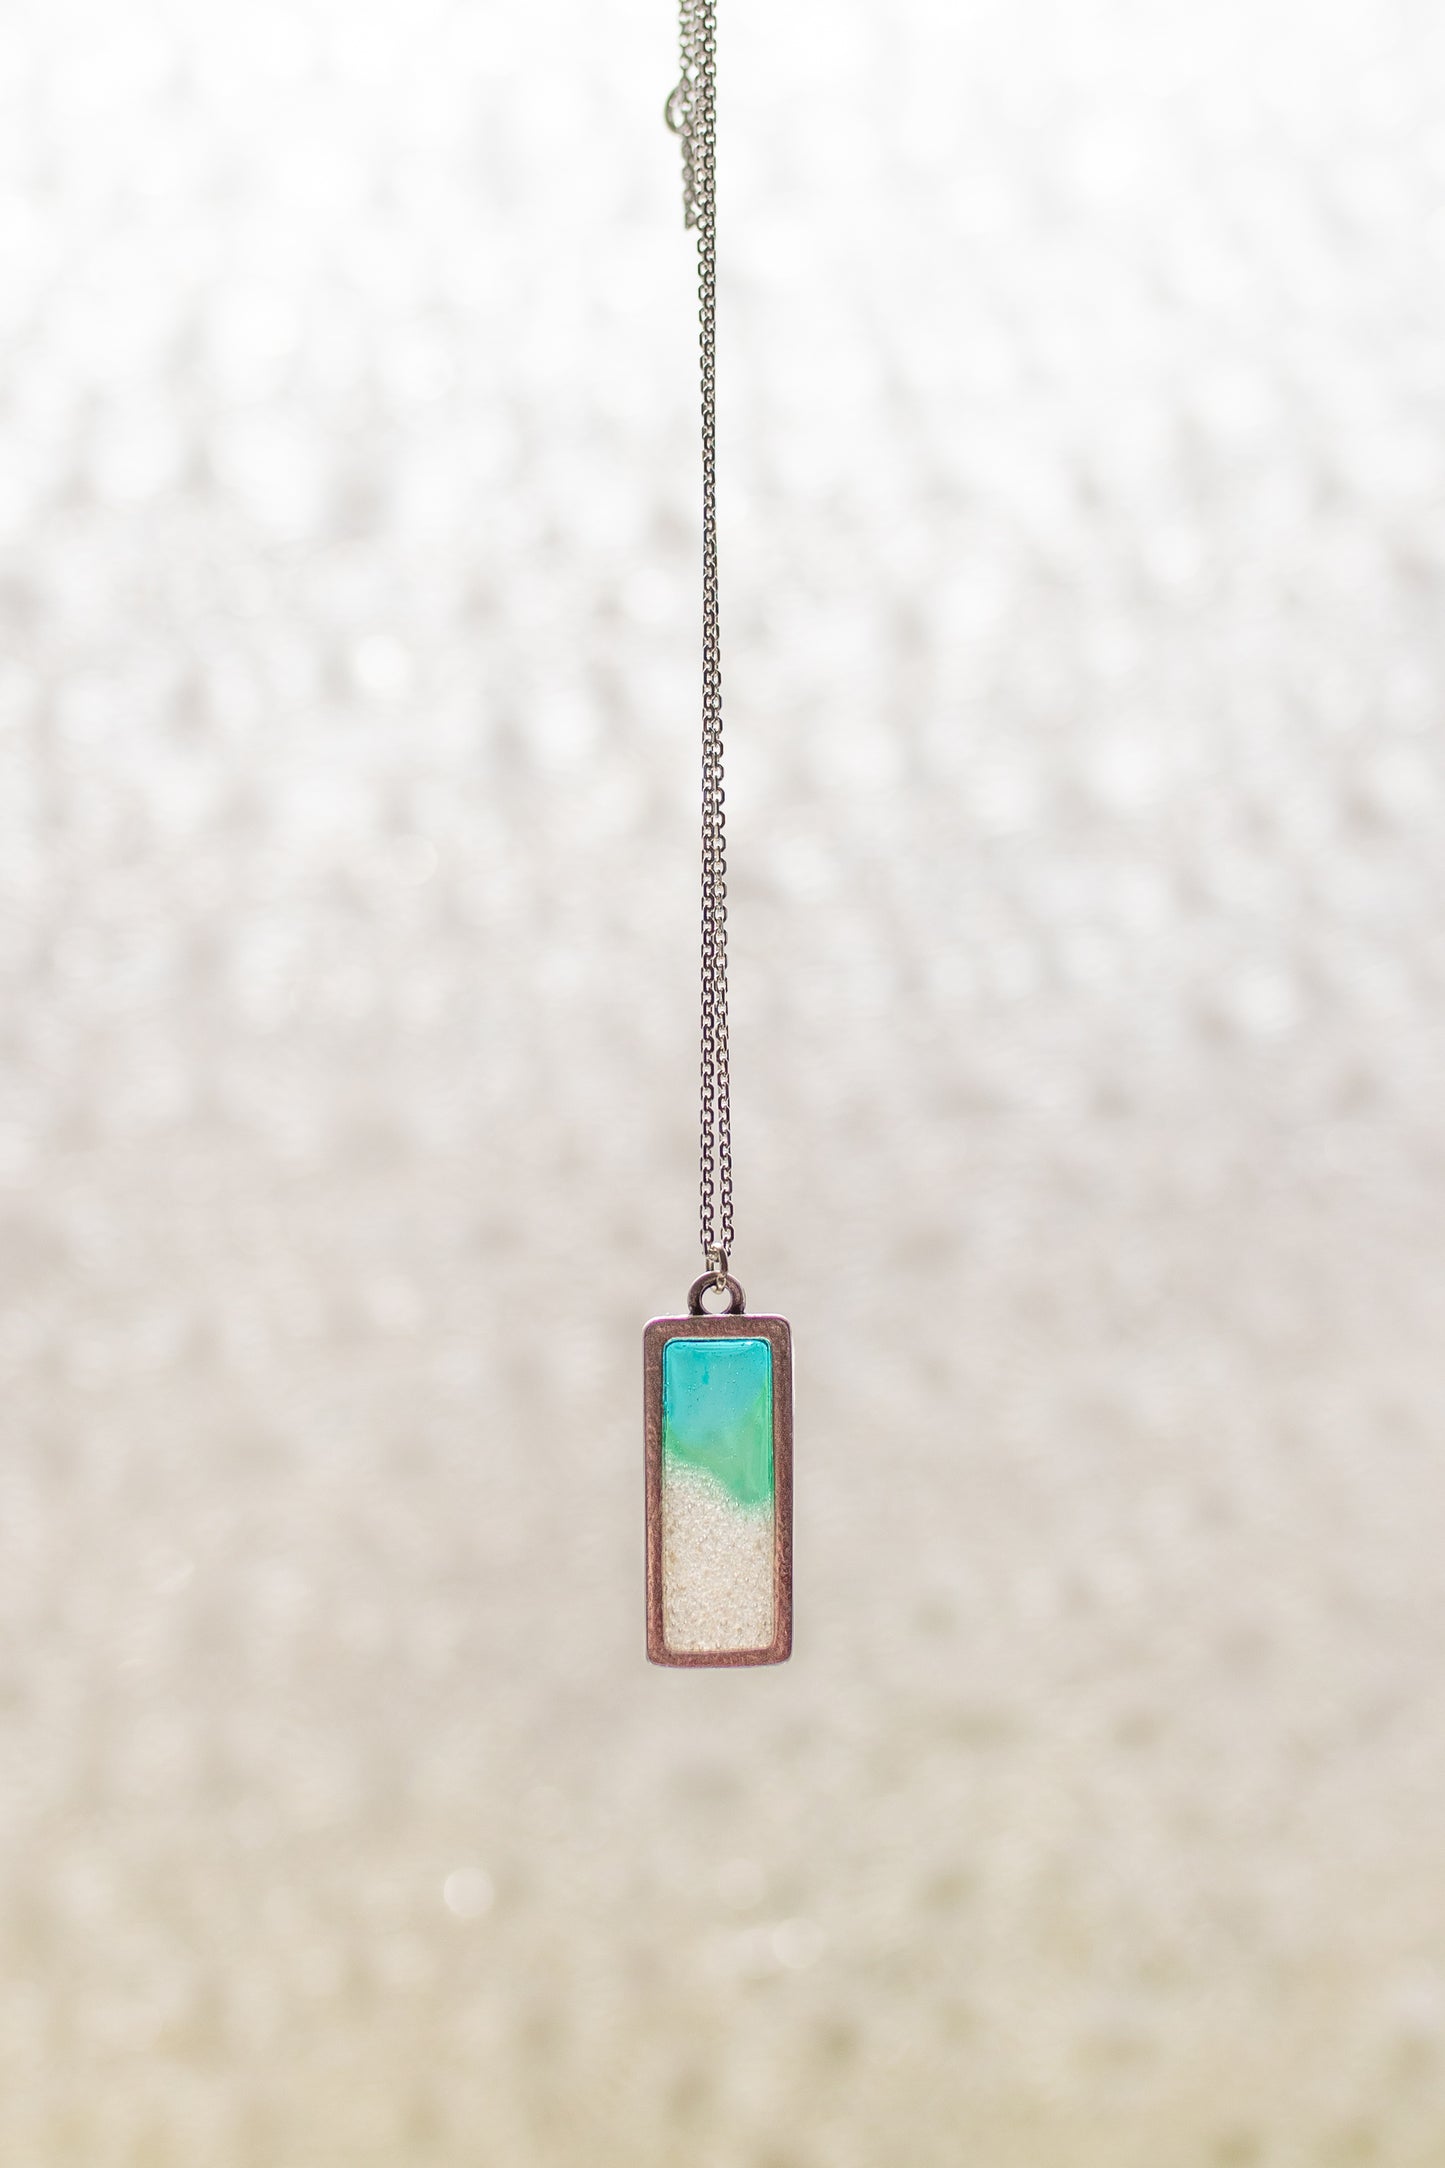 Resin Necklace made with Panama City Beach sand